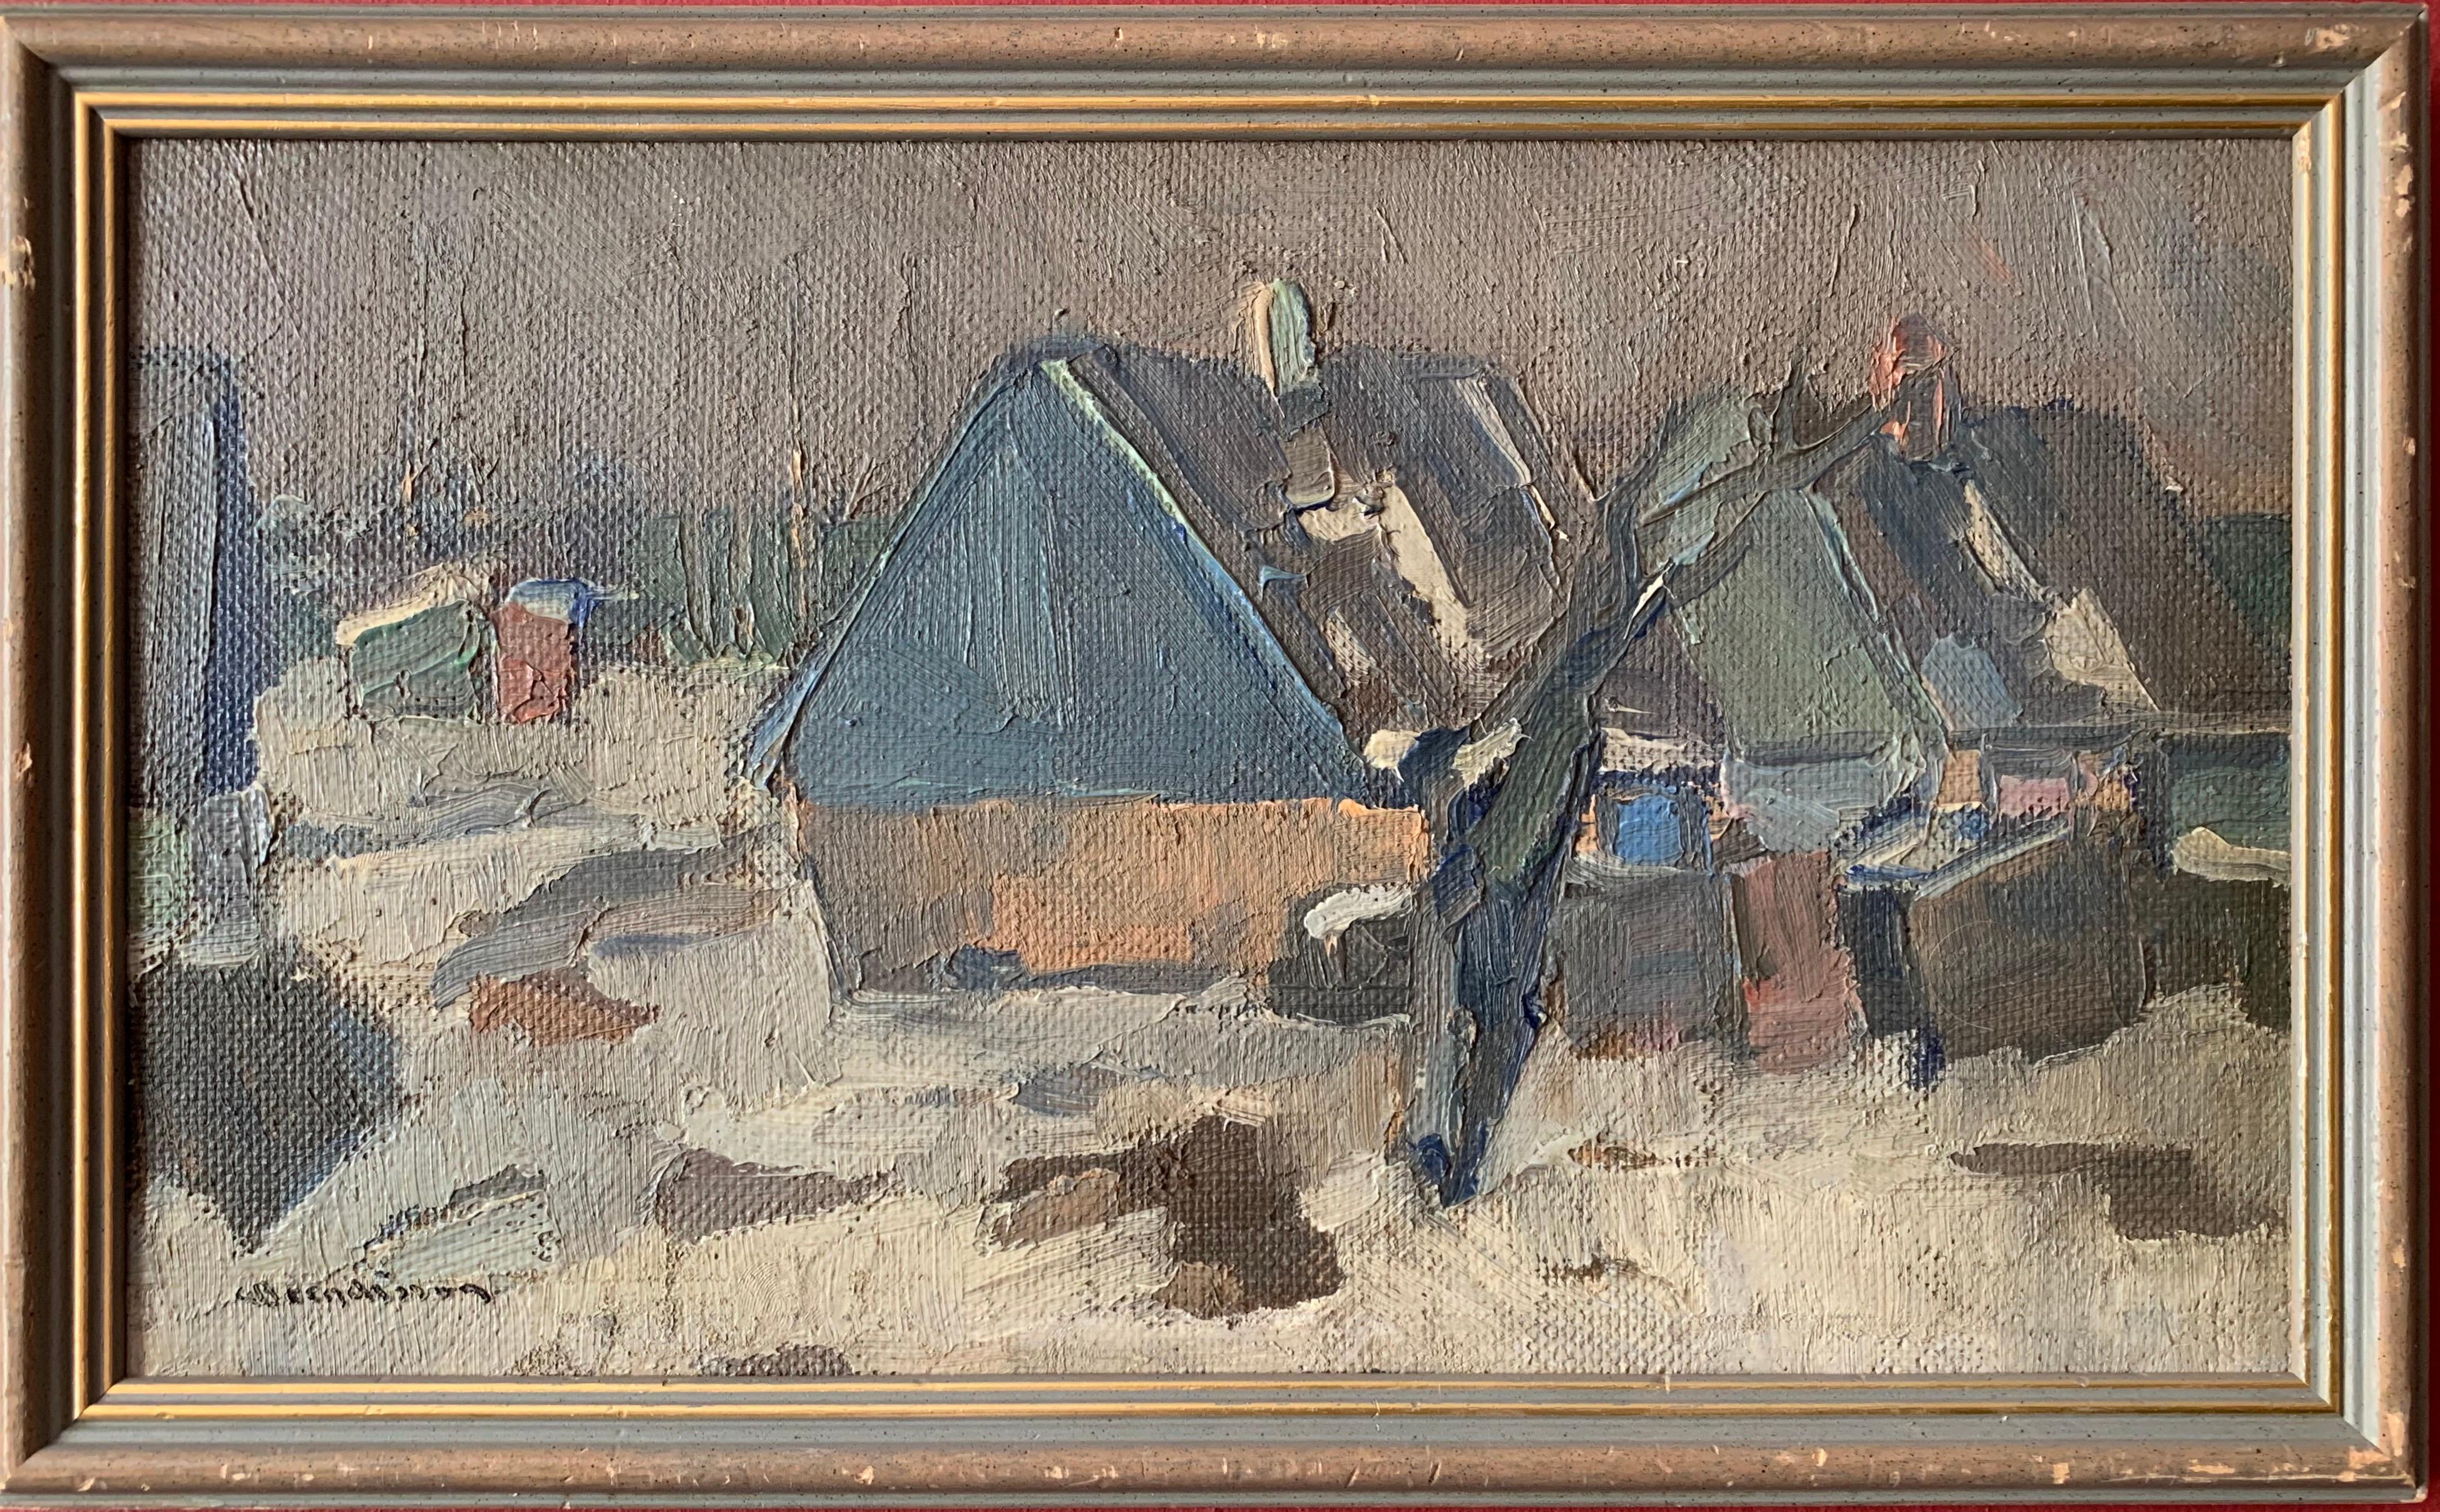 Carl Berndtsson  Landscape Painting - Mid 20th century Swedish oil painting Houses in Landscape